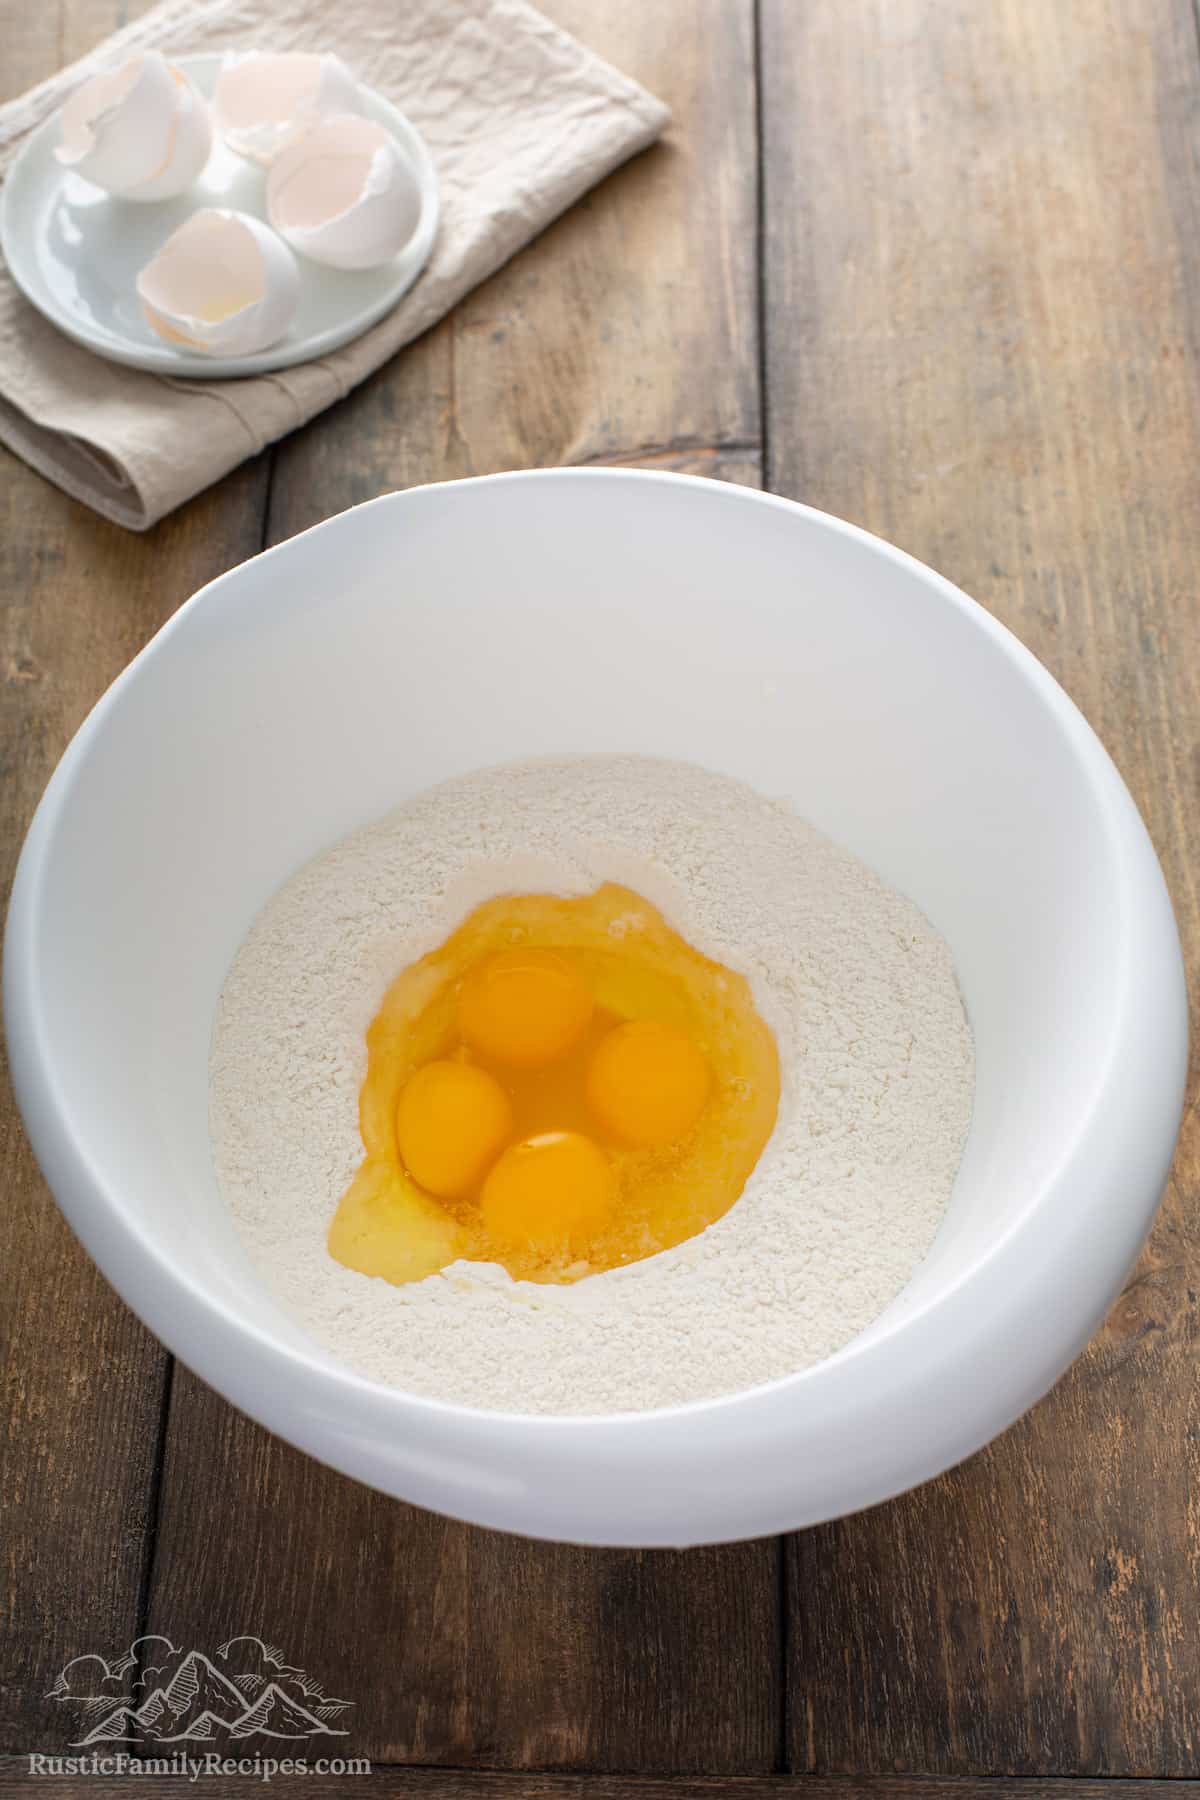 Eggs in the center of dry pancake ingredients